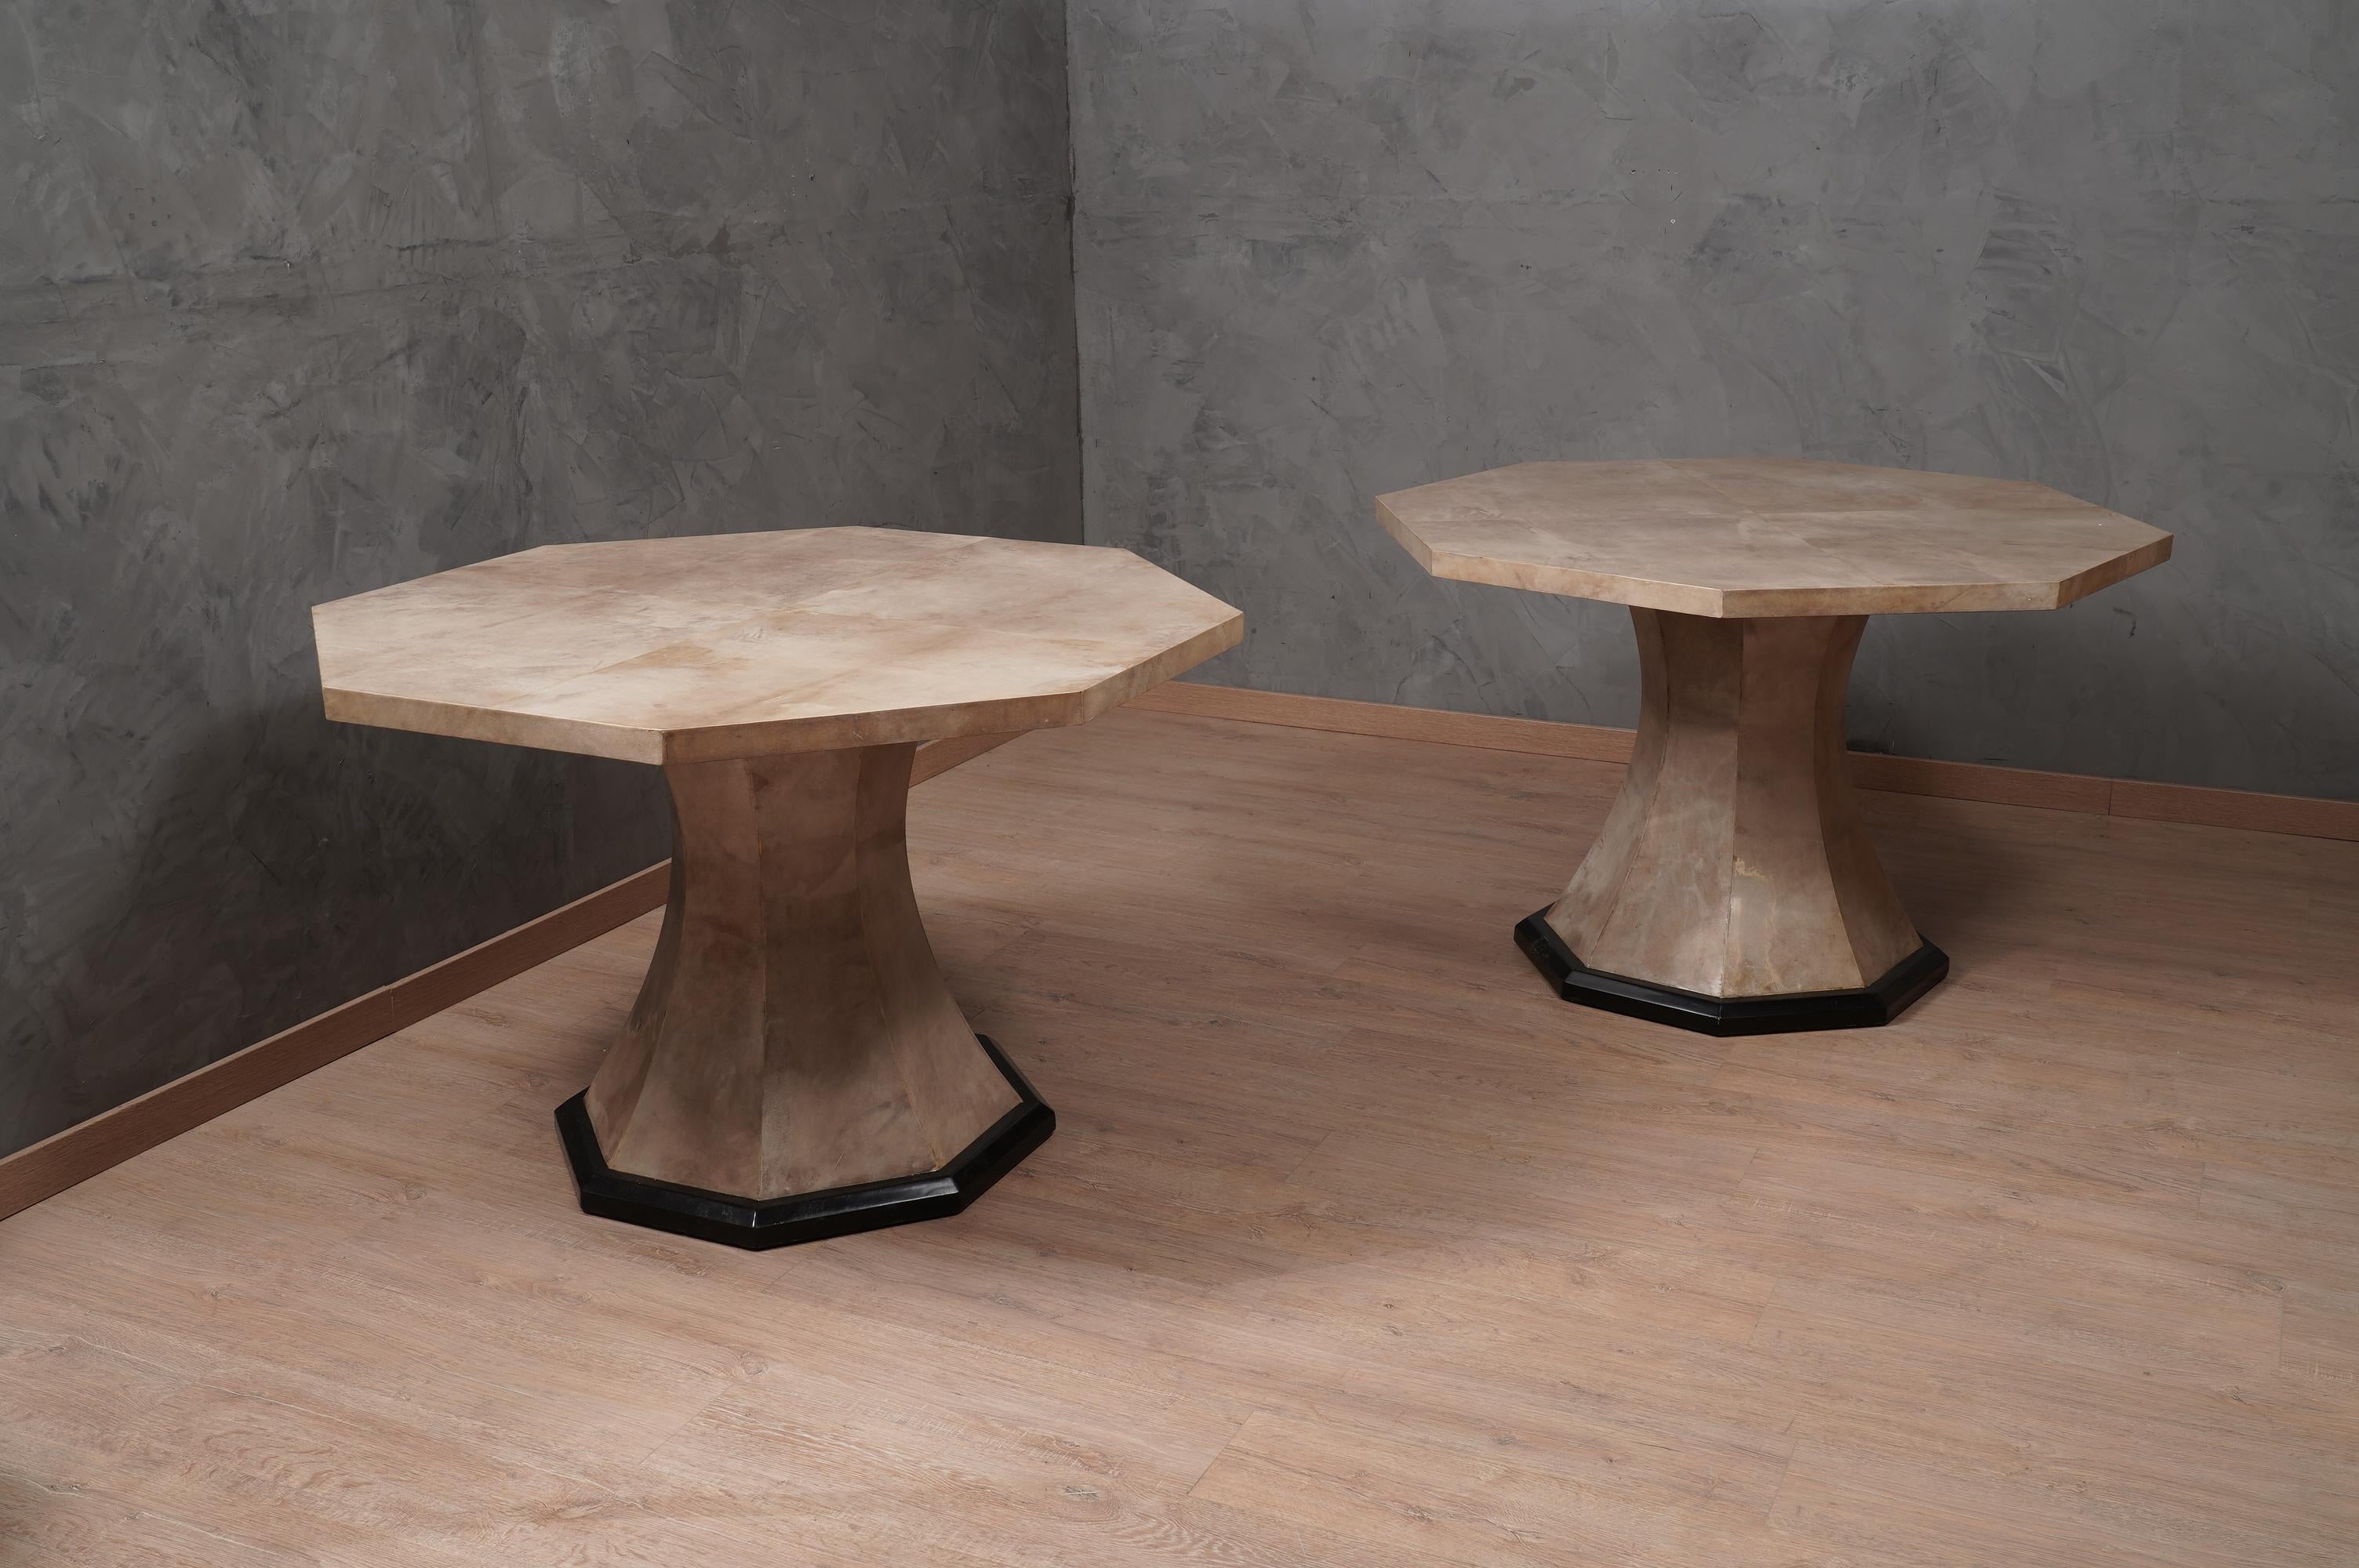 Elegant and original table in octagonal parchment leather, linear, distinct and well finished, the table from the end of the last century has a very strong character but at the same time its design makes it very light.

The table has an octagonal